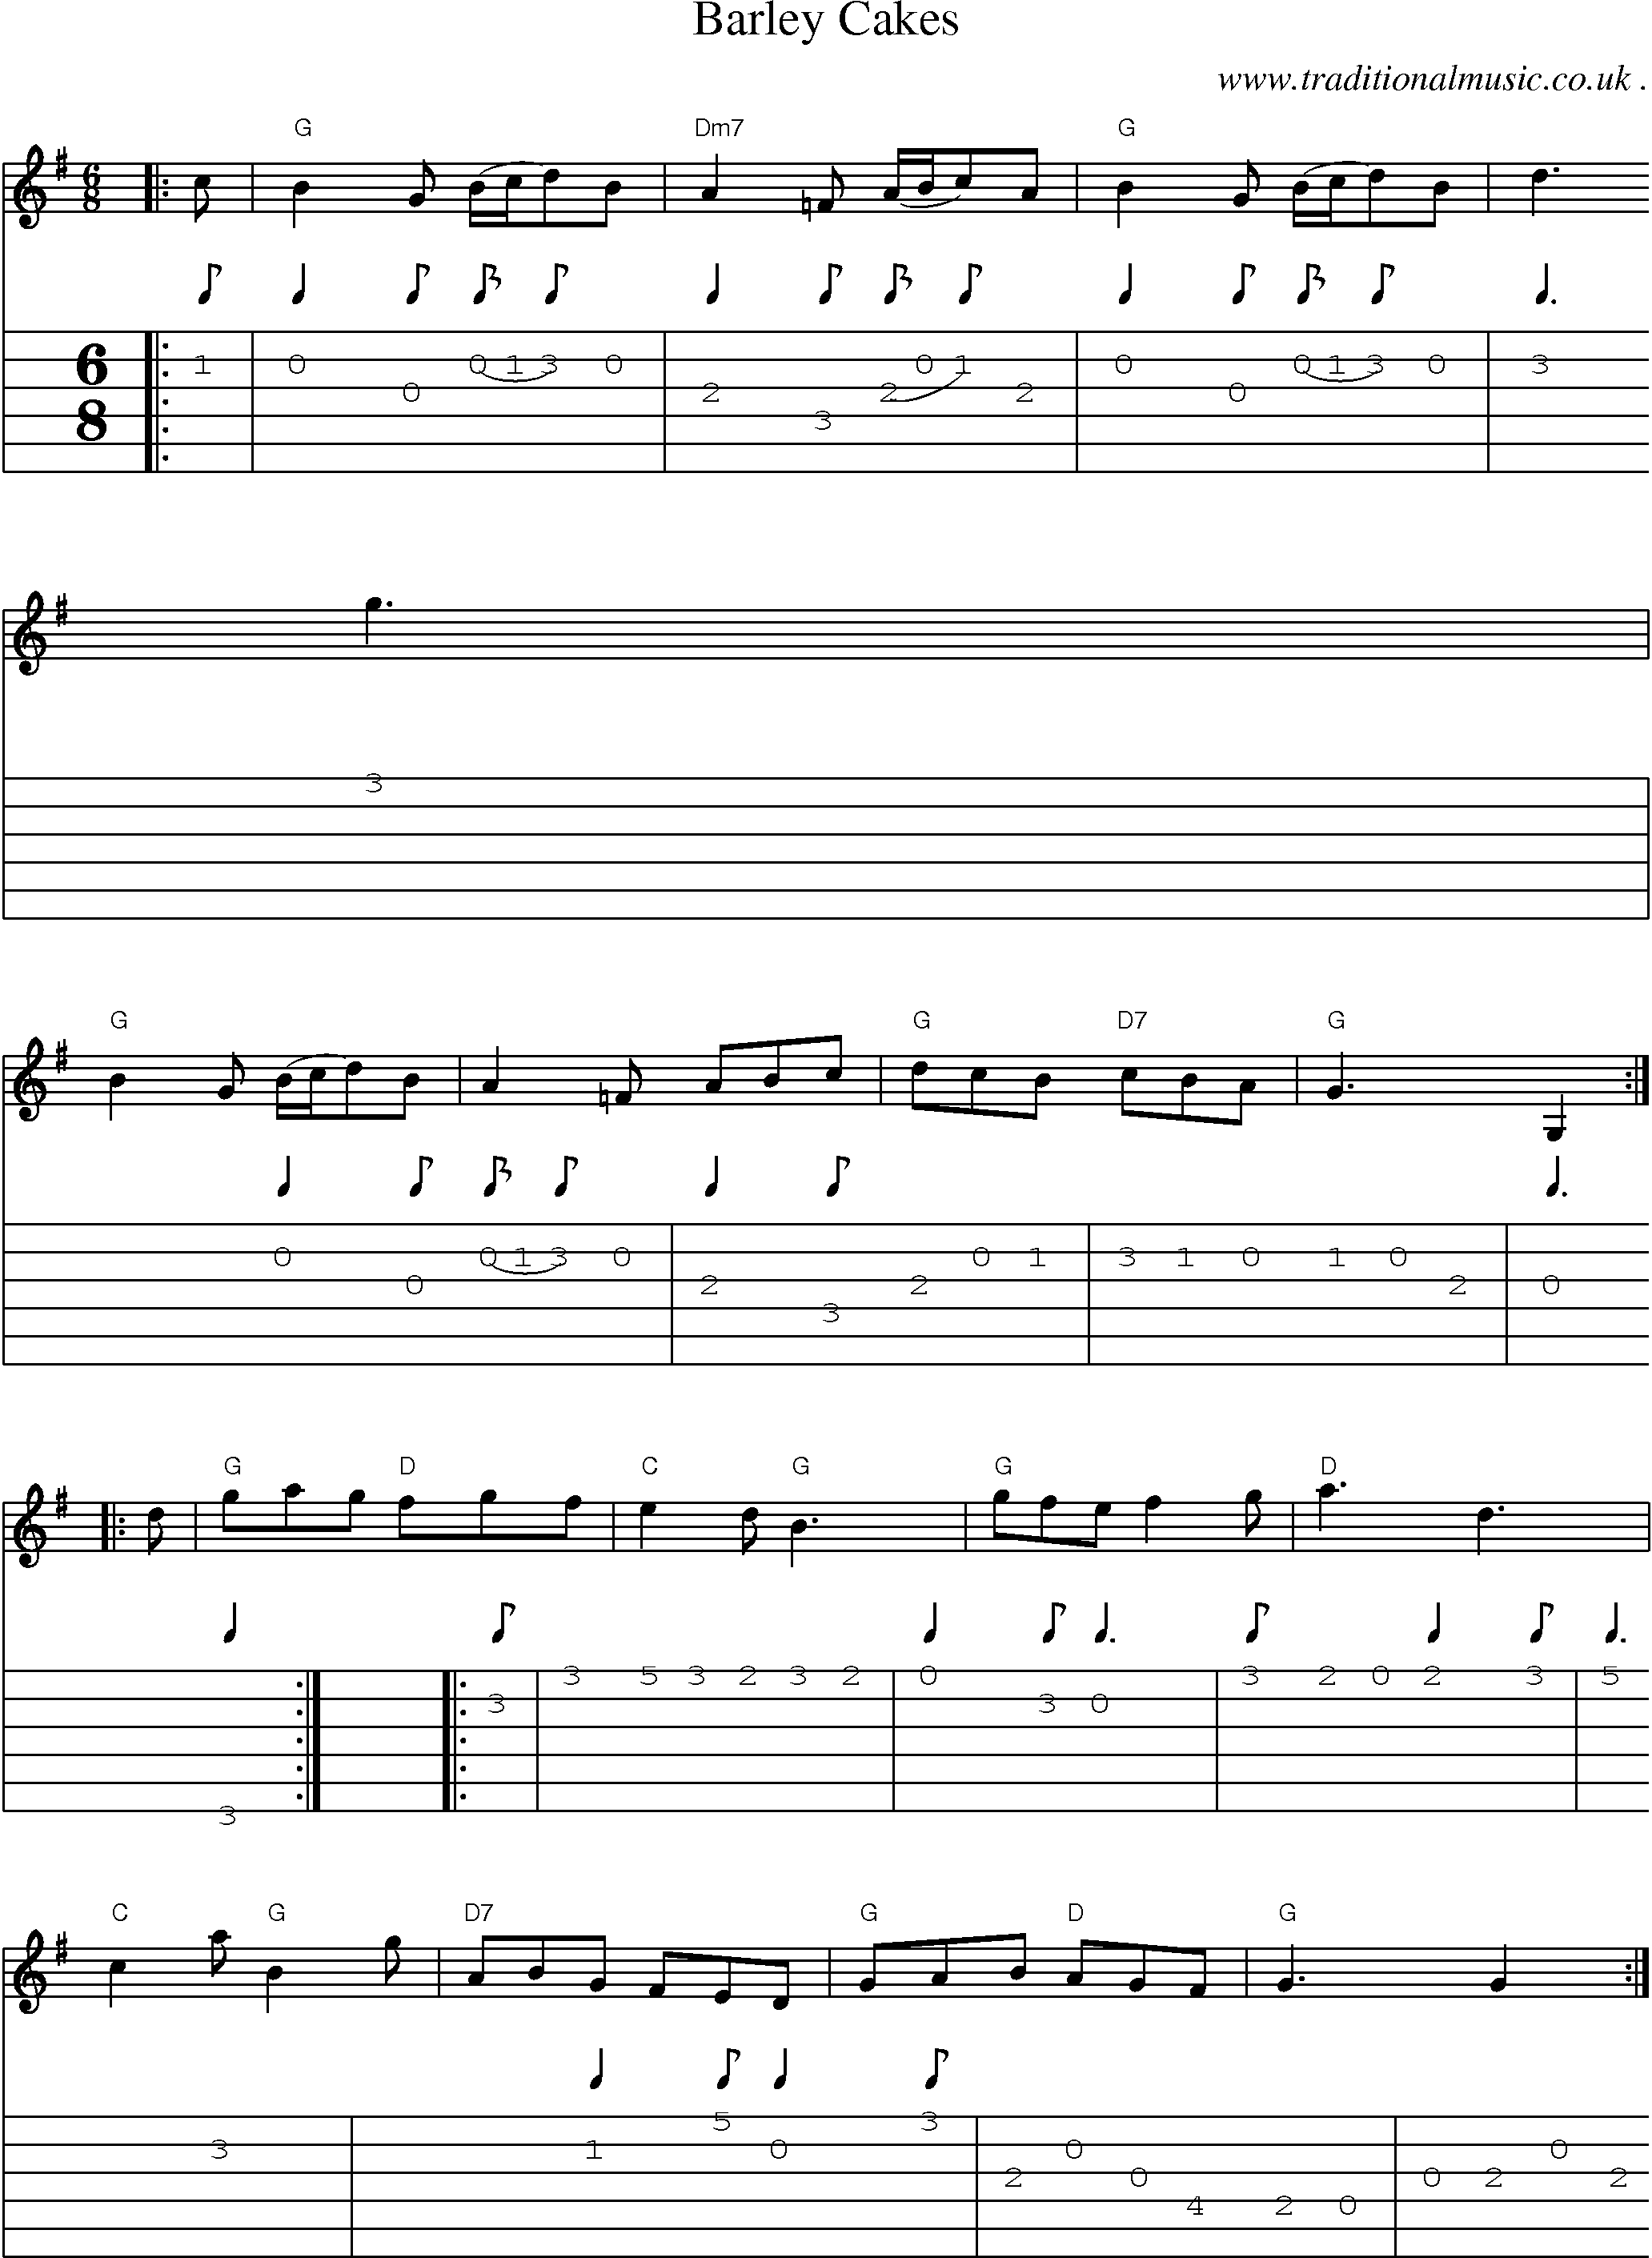 Sheet-music  score, Chords and Guitar Tabs for Barley Cakes